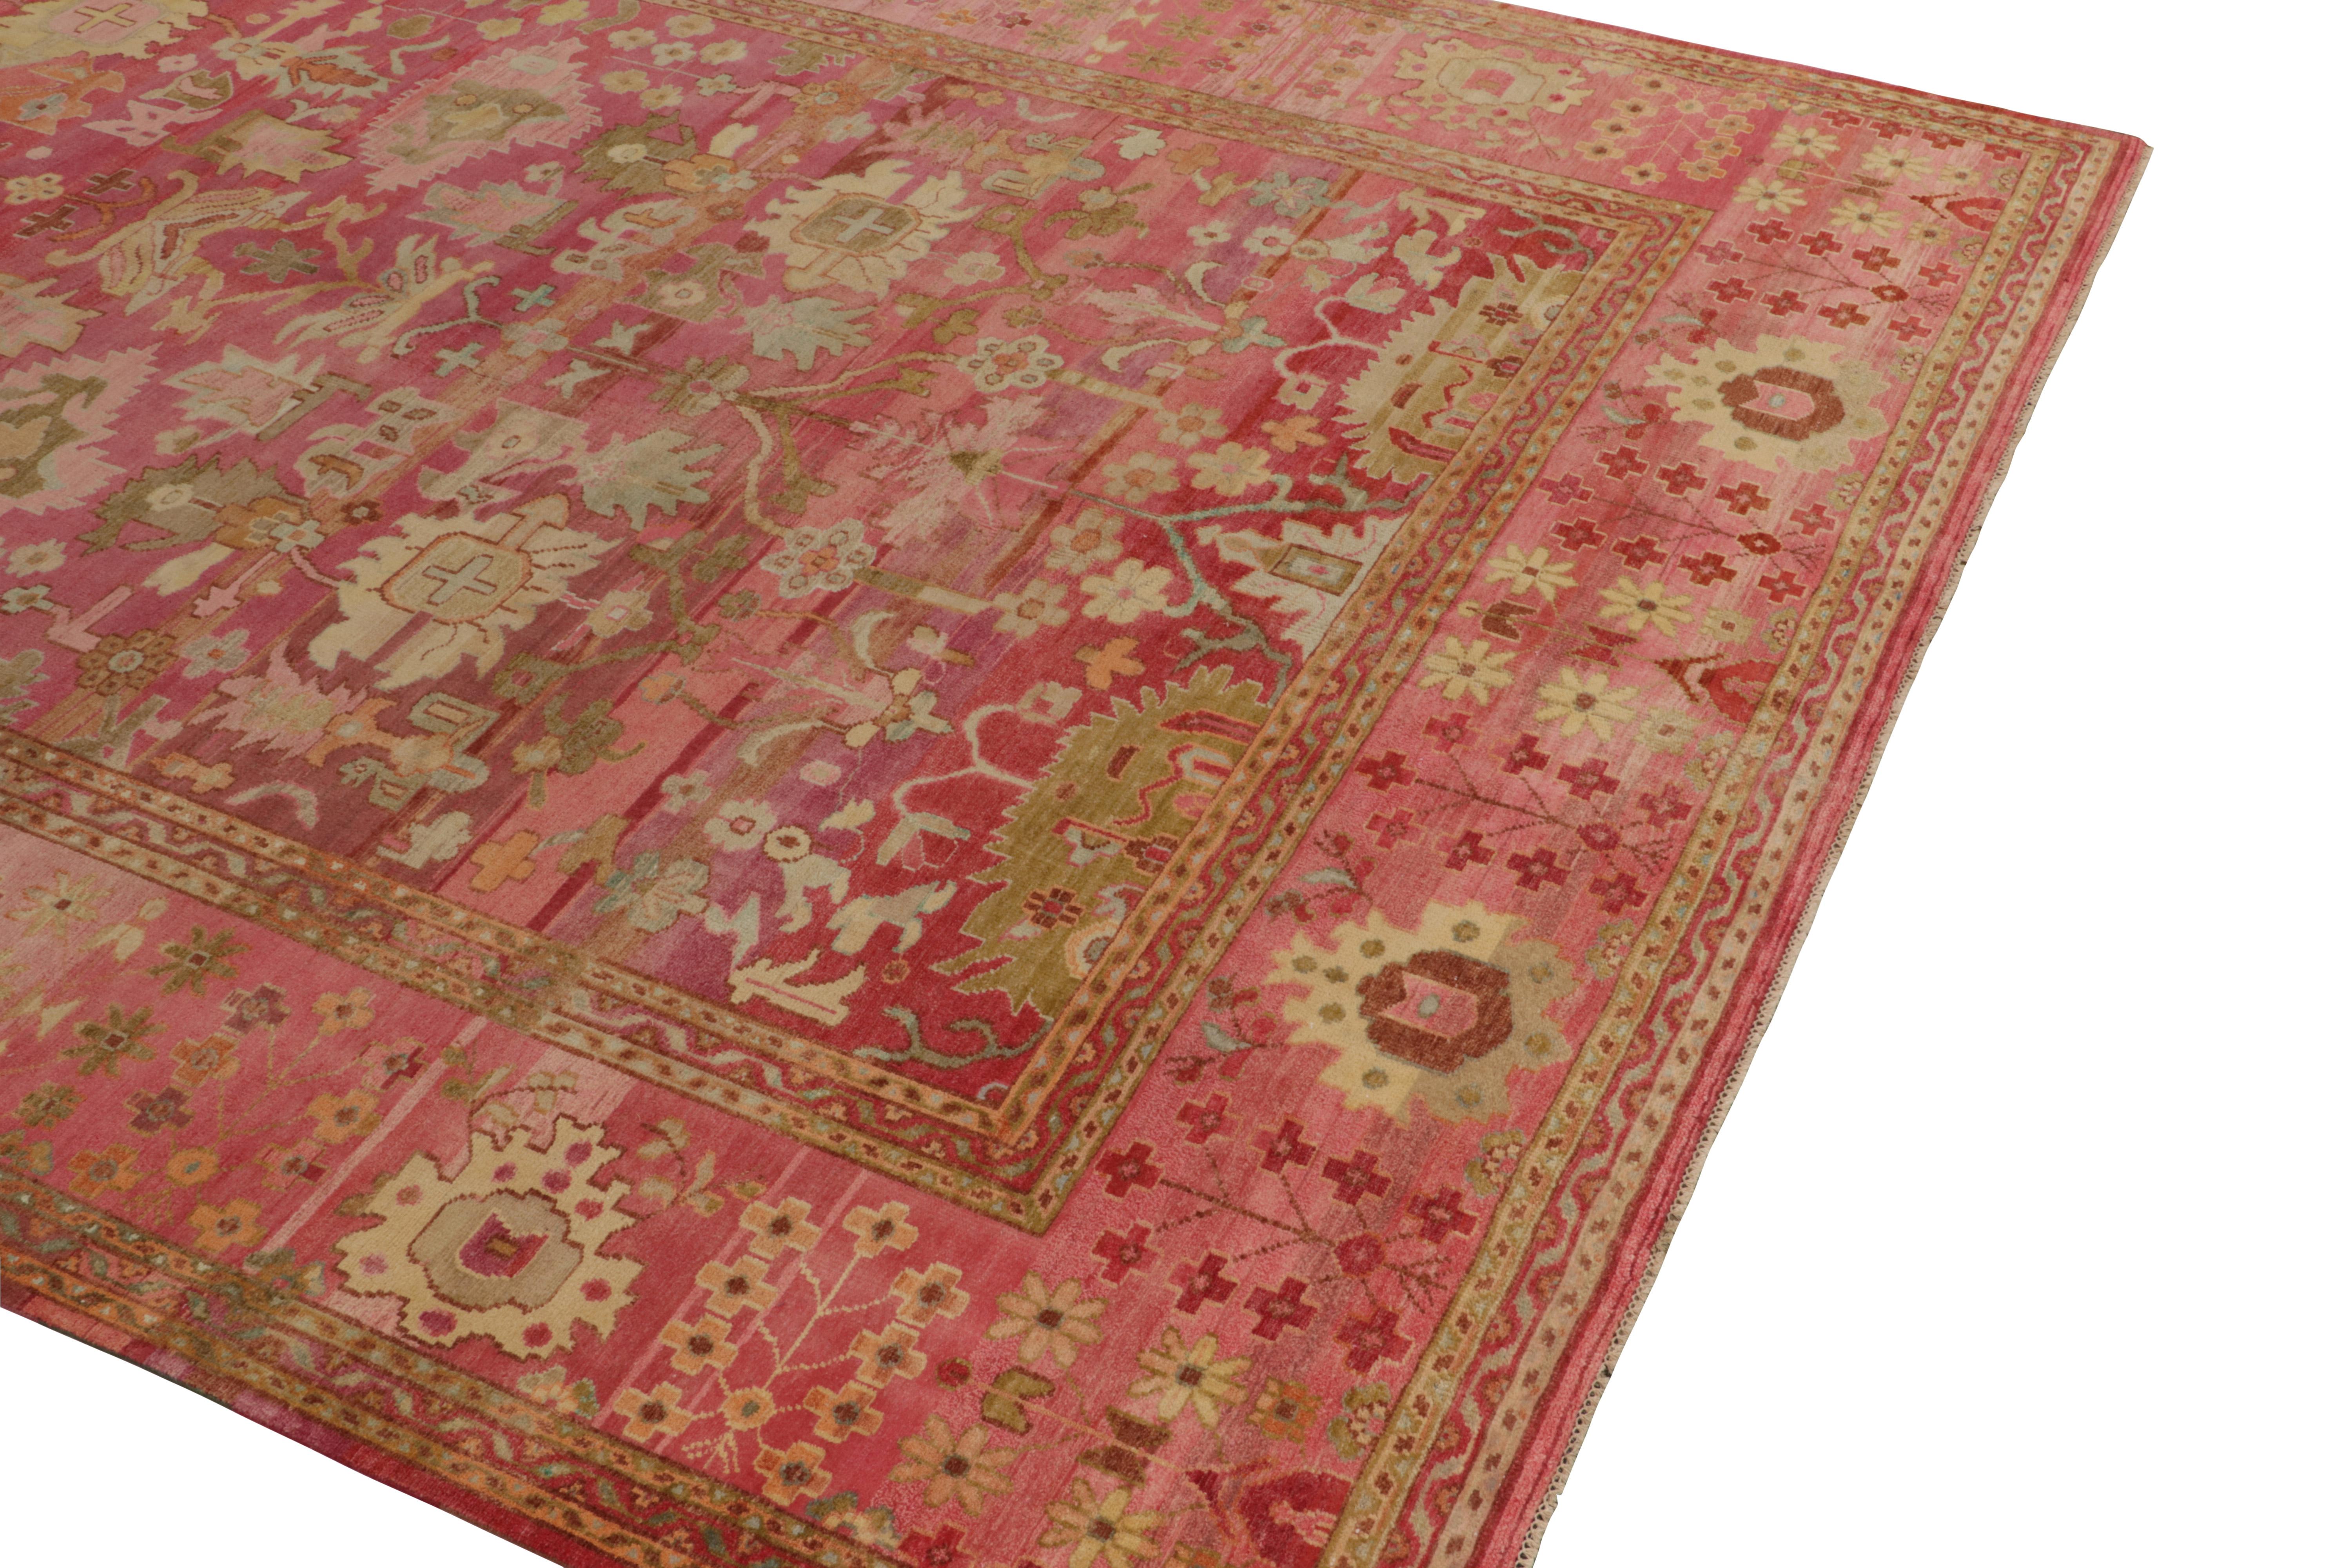 Rug & Kilim’s Classic Style Silk Rug in Pink, Beige-Brown Floral Pattern In New Condition For Sale In Long Island City, NY